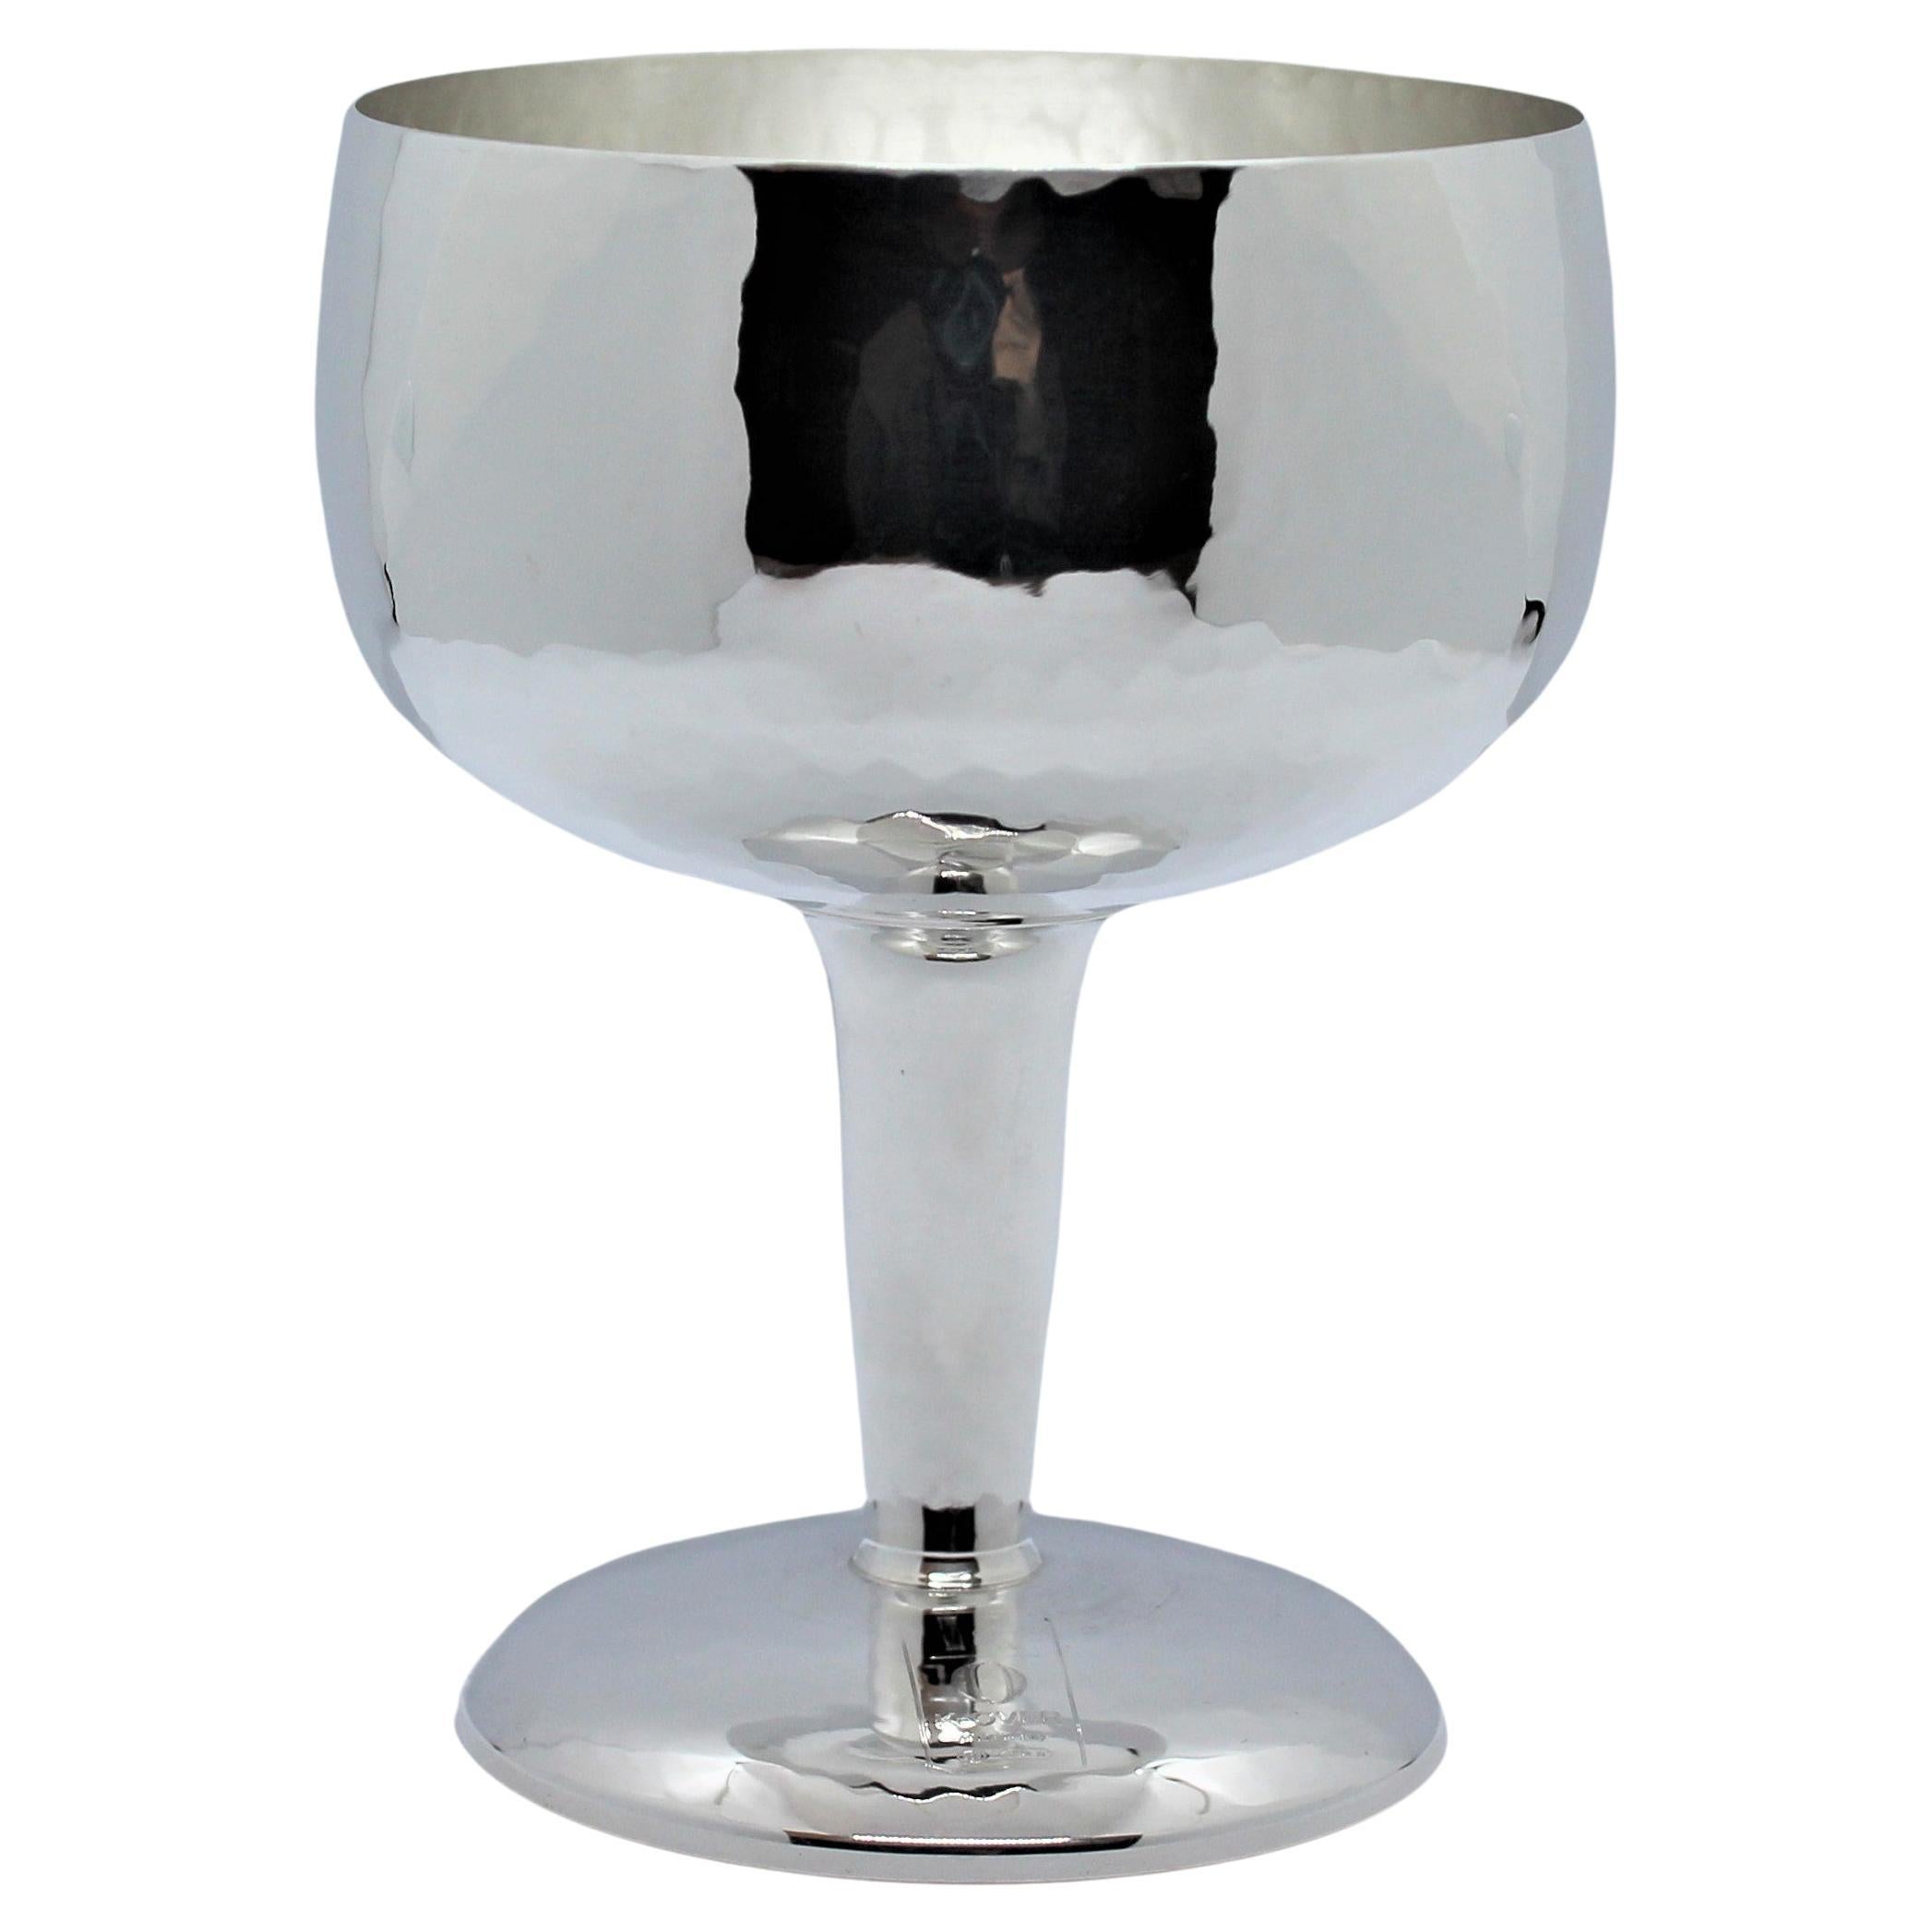 K-over sterling silver wine cup
Solid silver wine bowls are part of our newest collection. The value of these solid silver cups comes from both the excellent quality of the raw material and the special processing. As you can clearly see from the